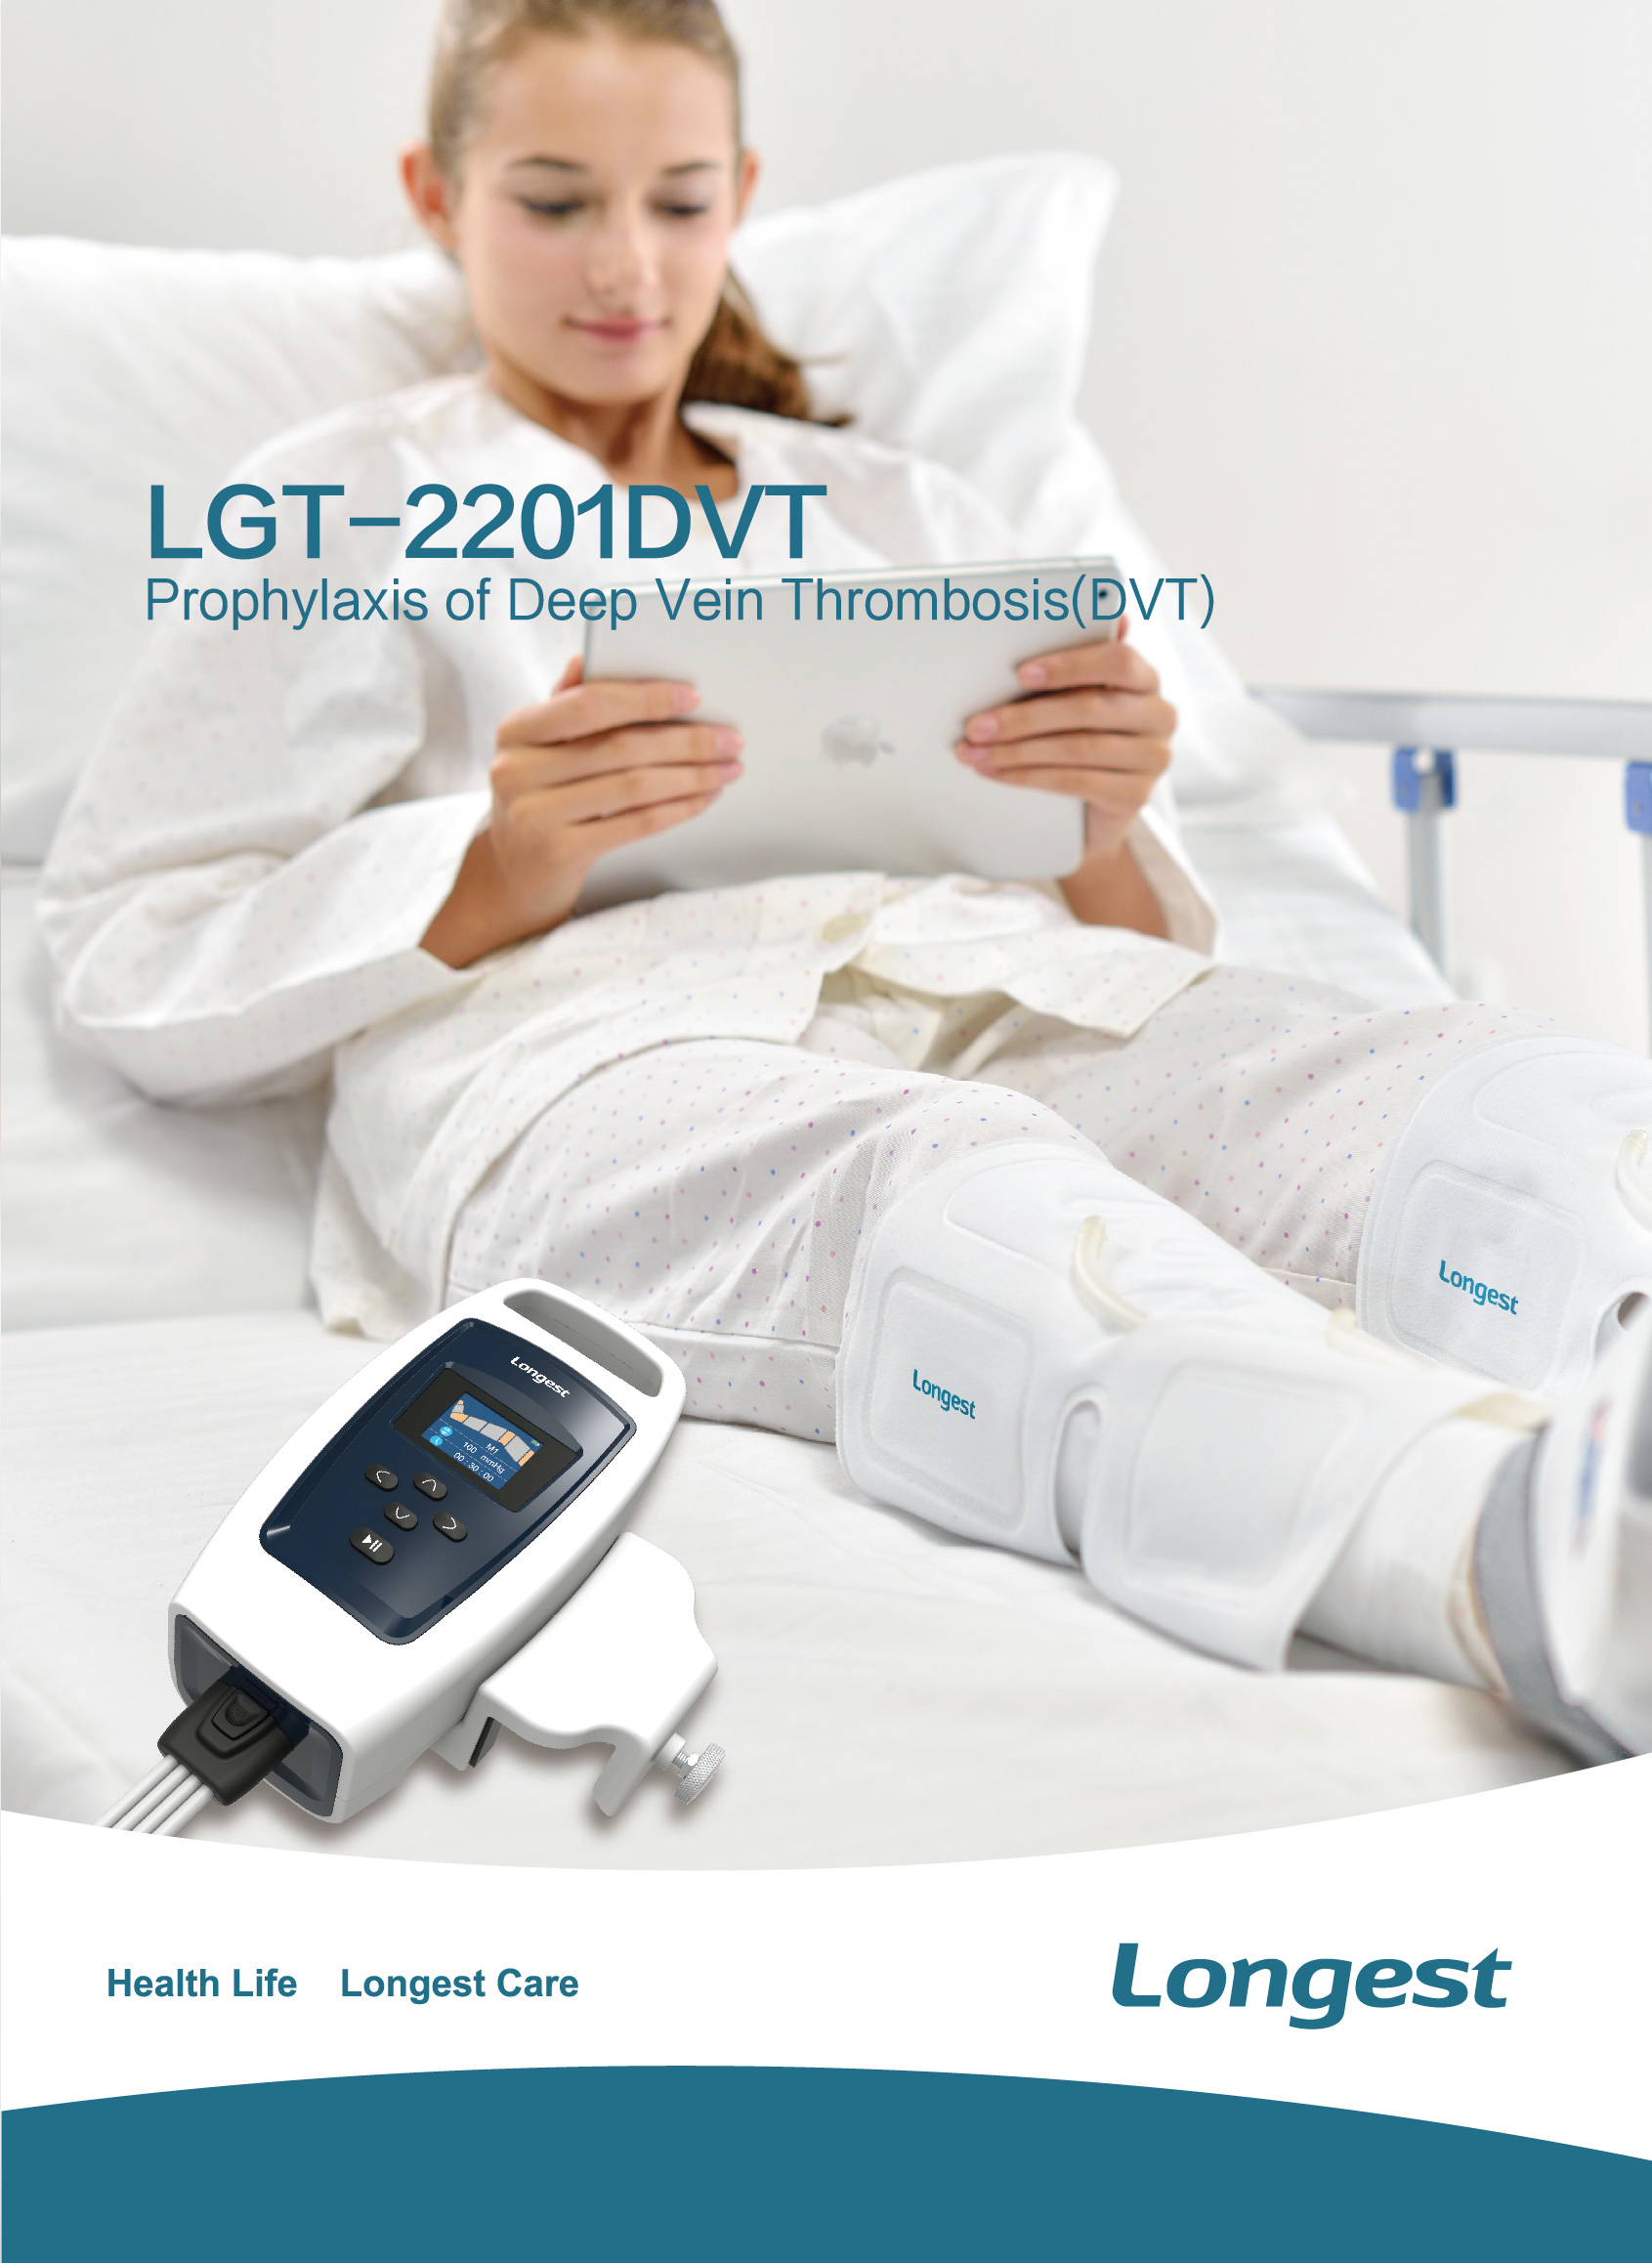 Longest Compression Therapy Device